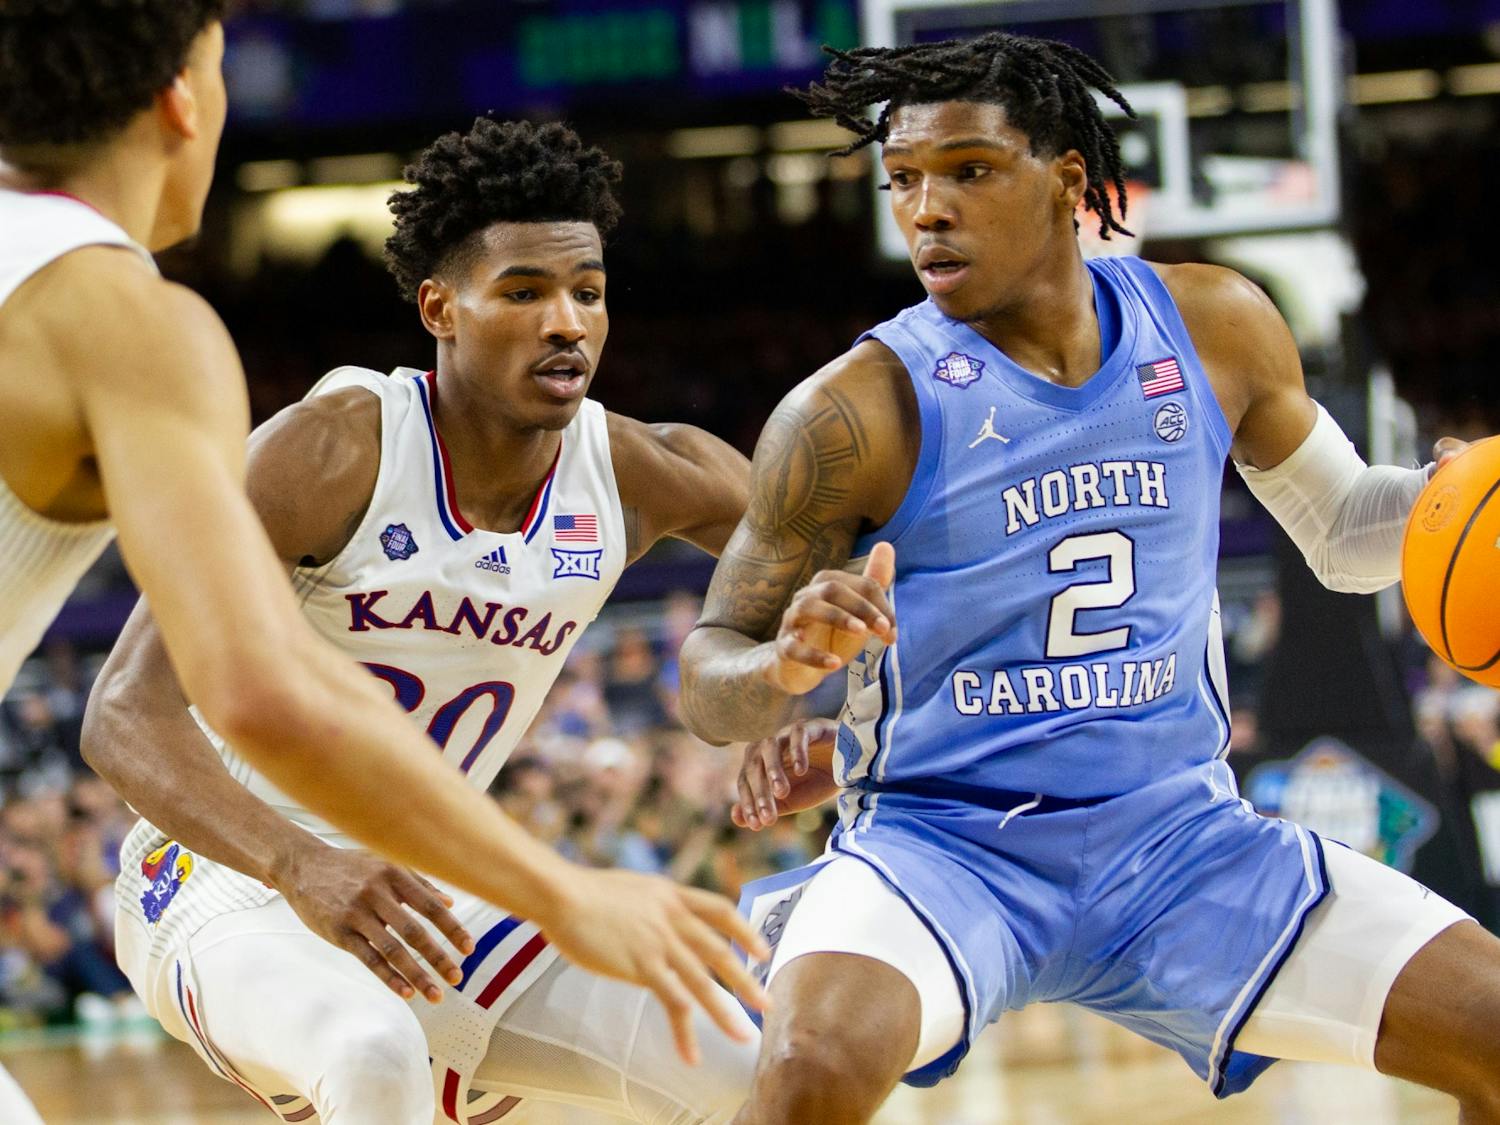 Though they led by 16 in the first half, the UNC men's basketball team fell to Kansas, 72-69, on Monday.&nbsp;